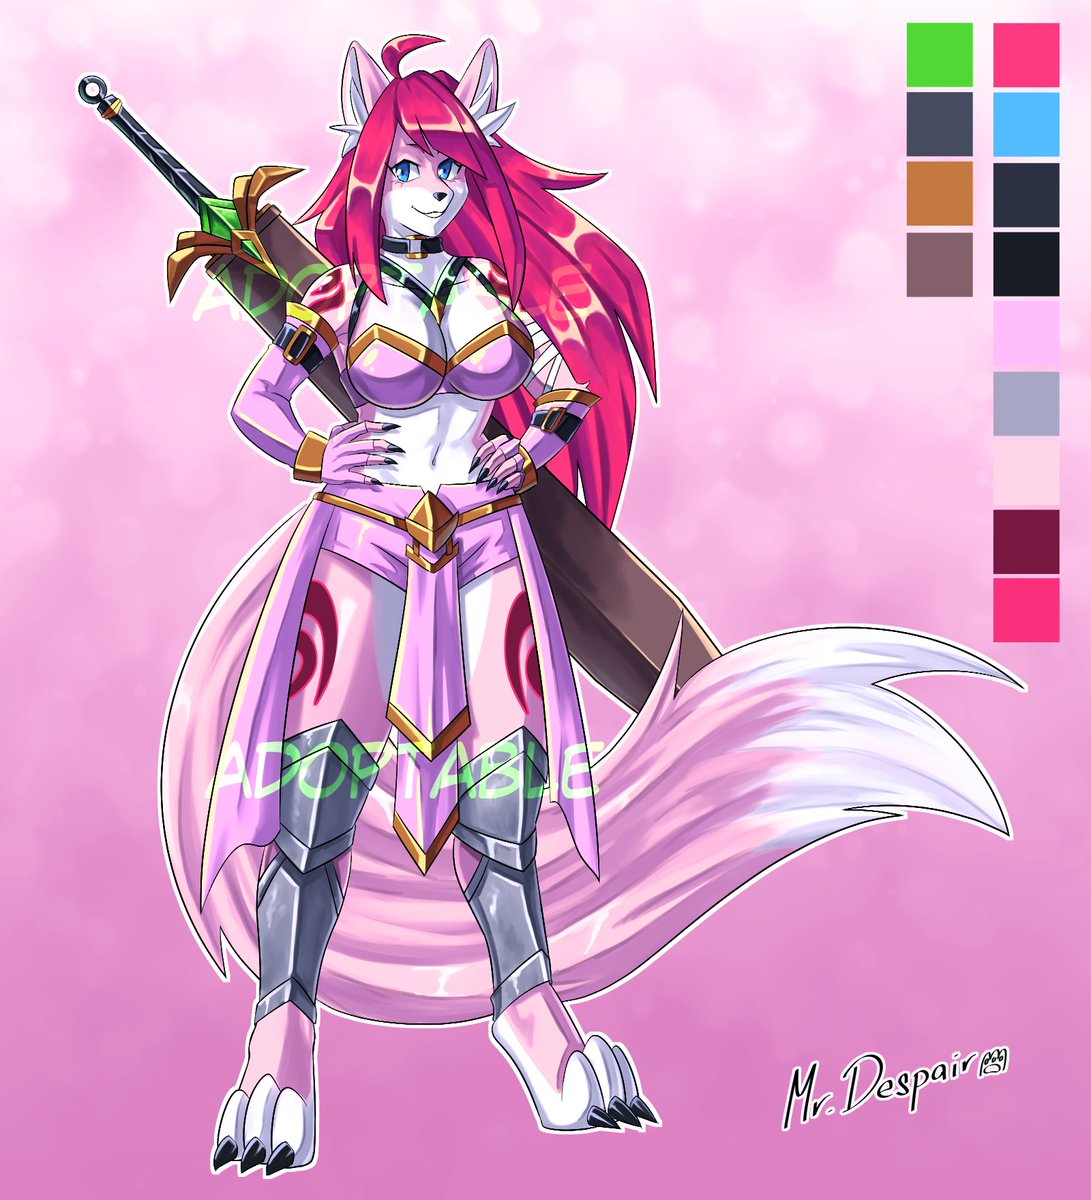 PINK WARRIOR ADOPTABLE
Link in comments

#adopt #adopts #adoptable #auction #openauction #openadoptable #originalcharacter #adoptableauction #ocadoptable #cute #anthro #adoptables #wolf #fox #female #forsale #paypal #wolfadoptable #furry #characterforsale #fantasy #warrior #sword